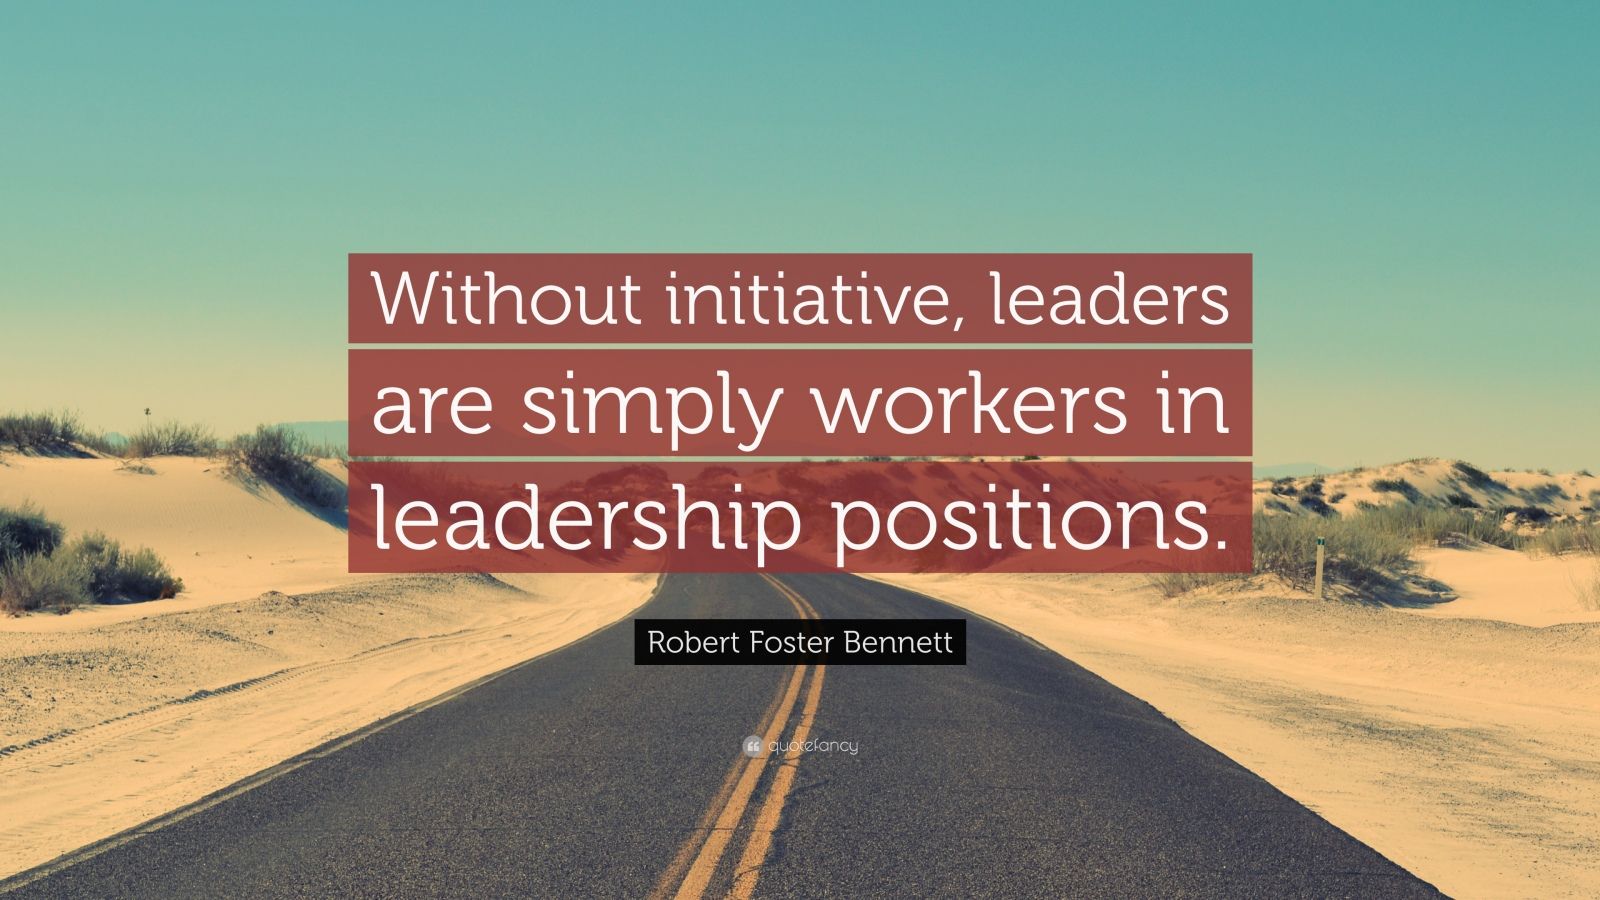 Robert Foster Bennett Quote: “Without initiative, leaders are simply ...